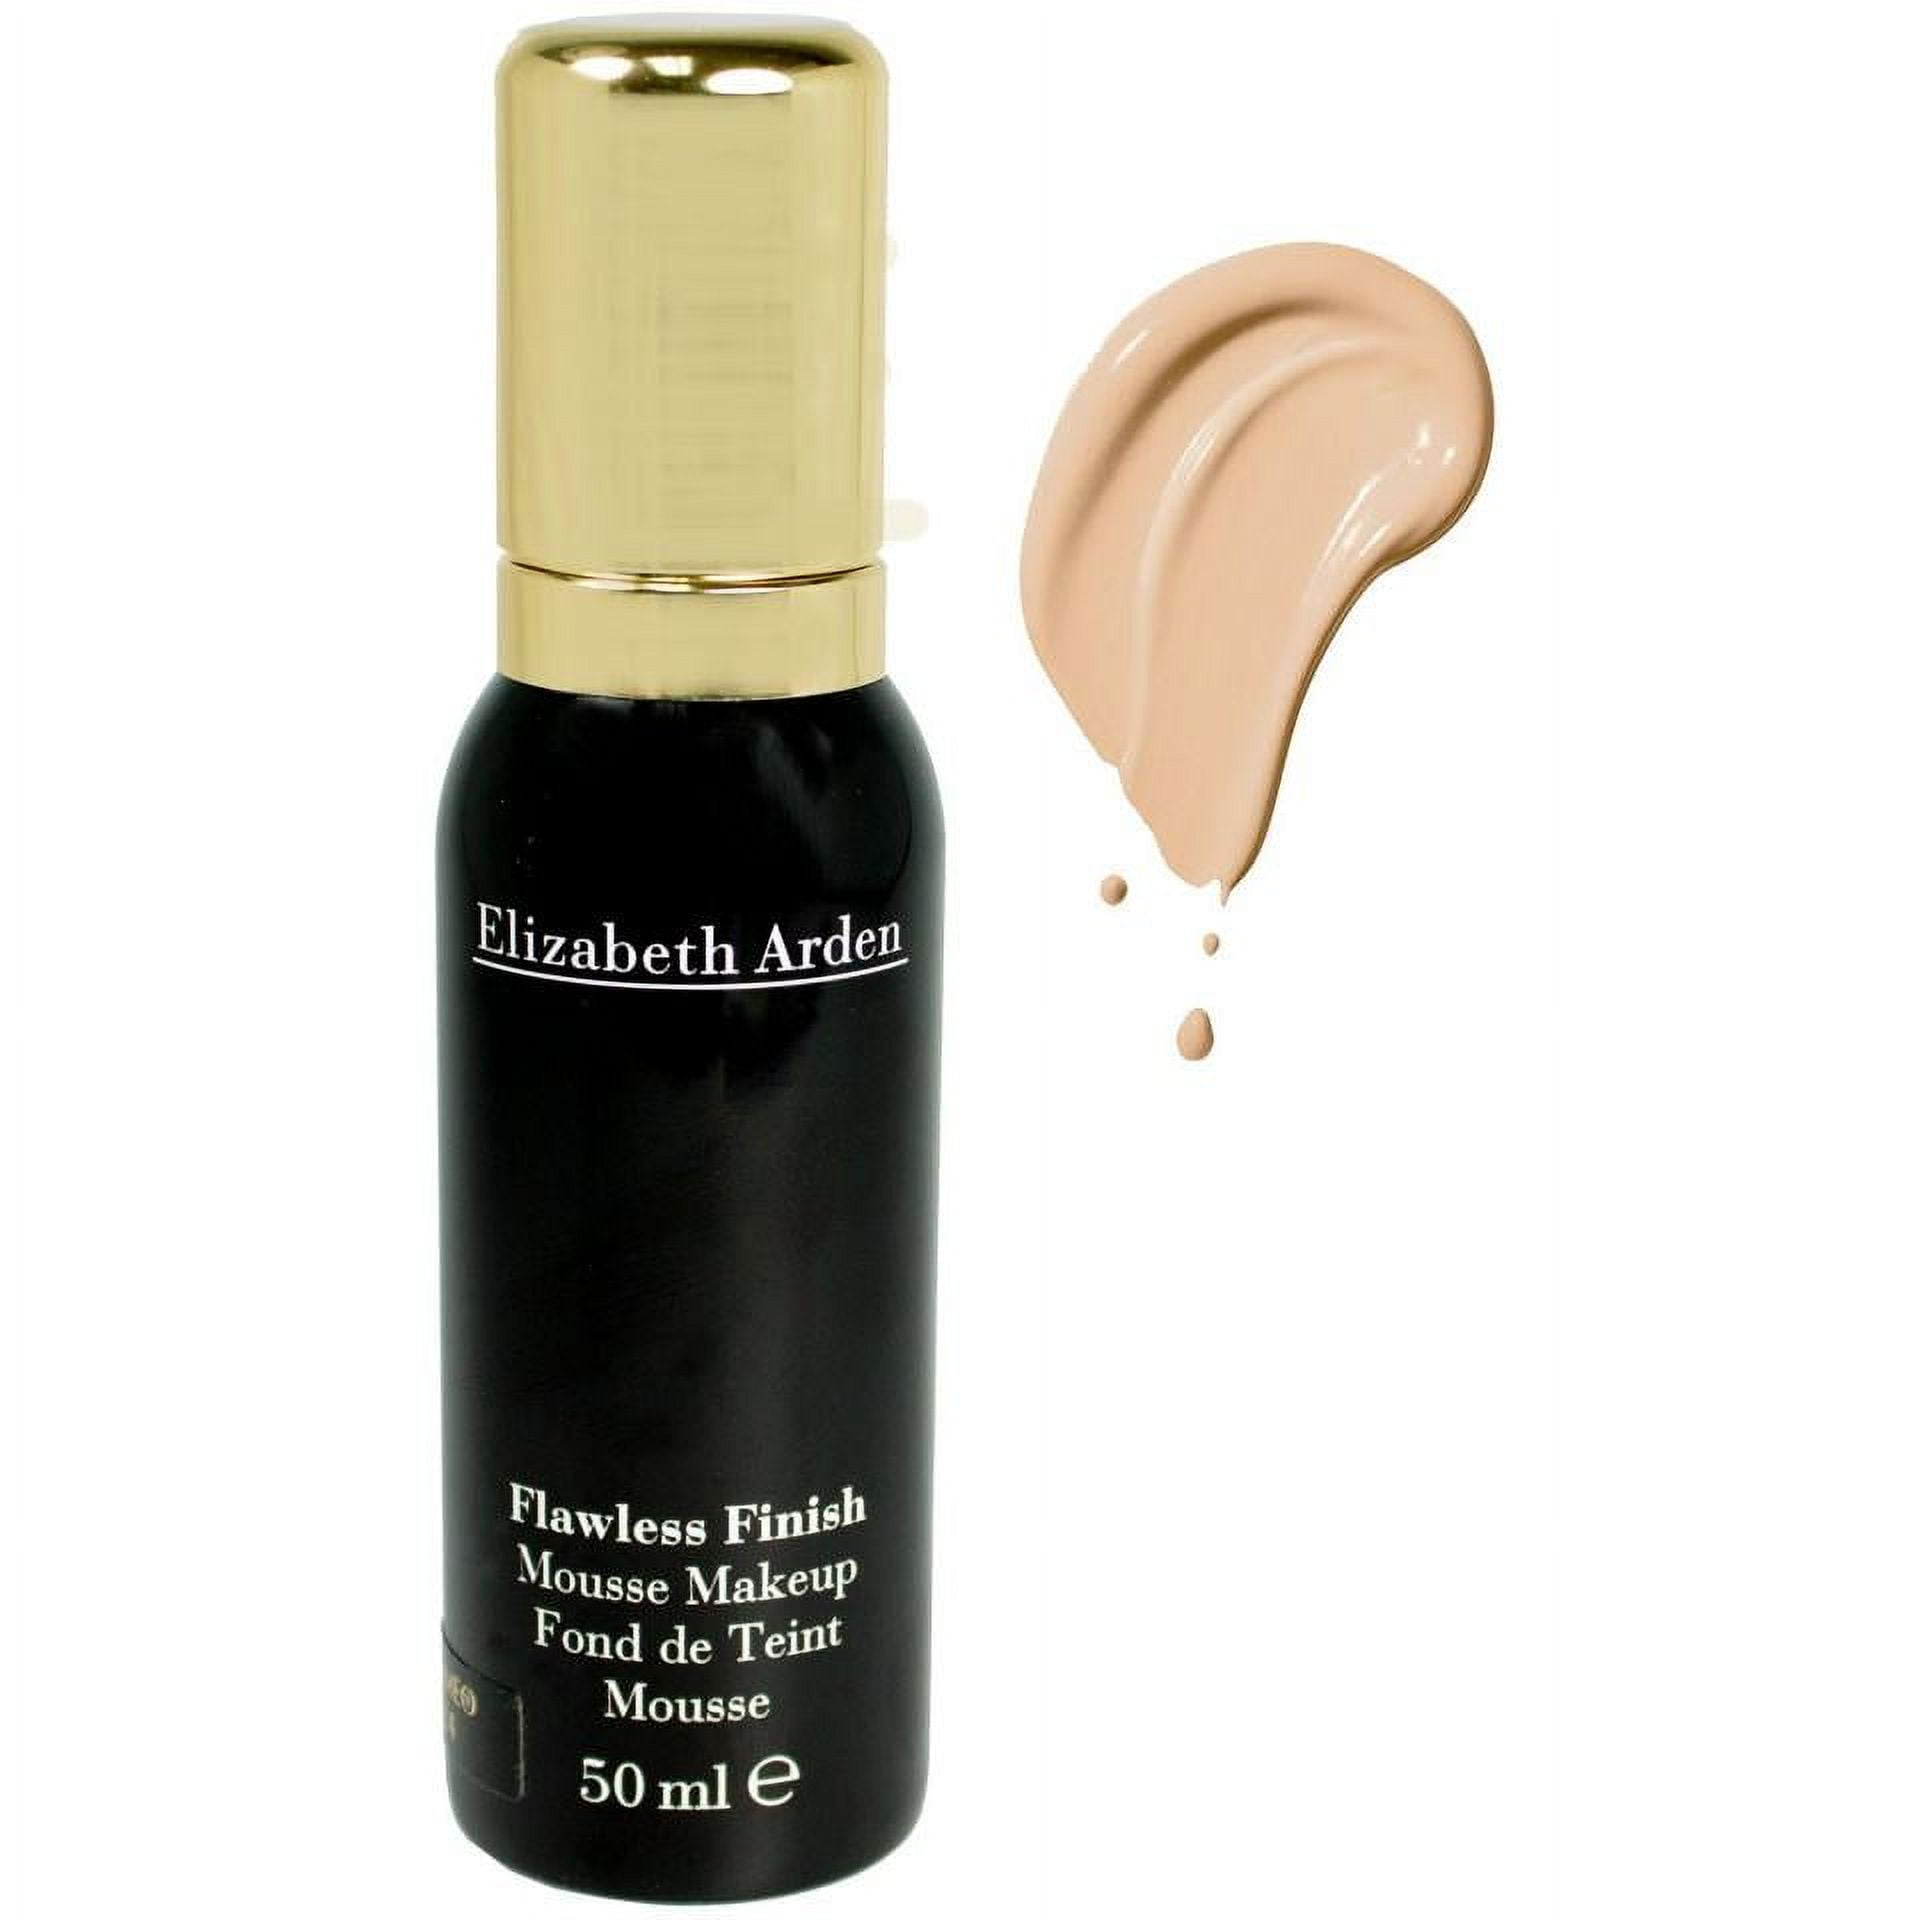 BEAUTY, Worth the Hype? We Tried the New Elizabeth Arden Flawless